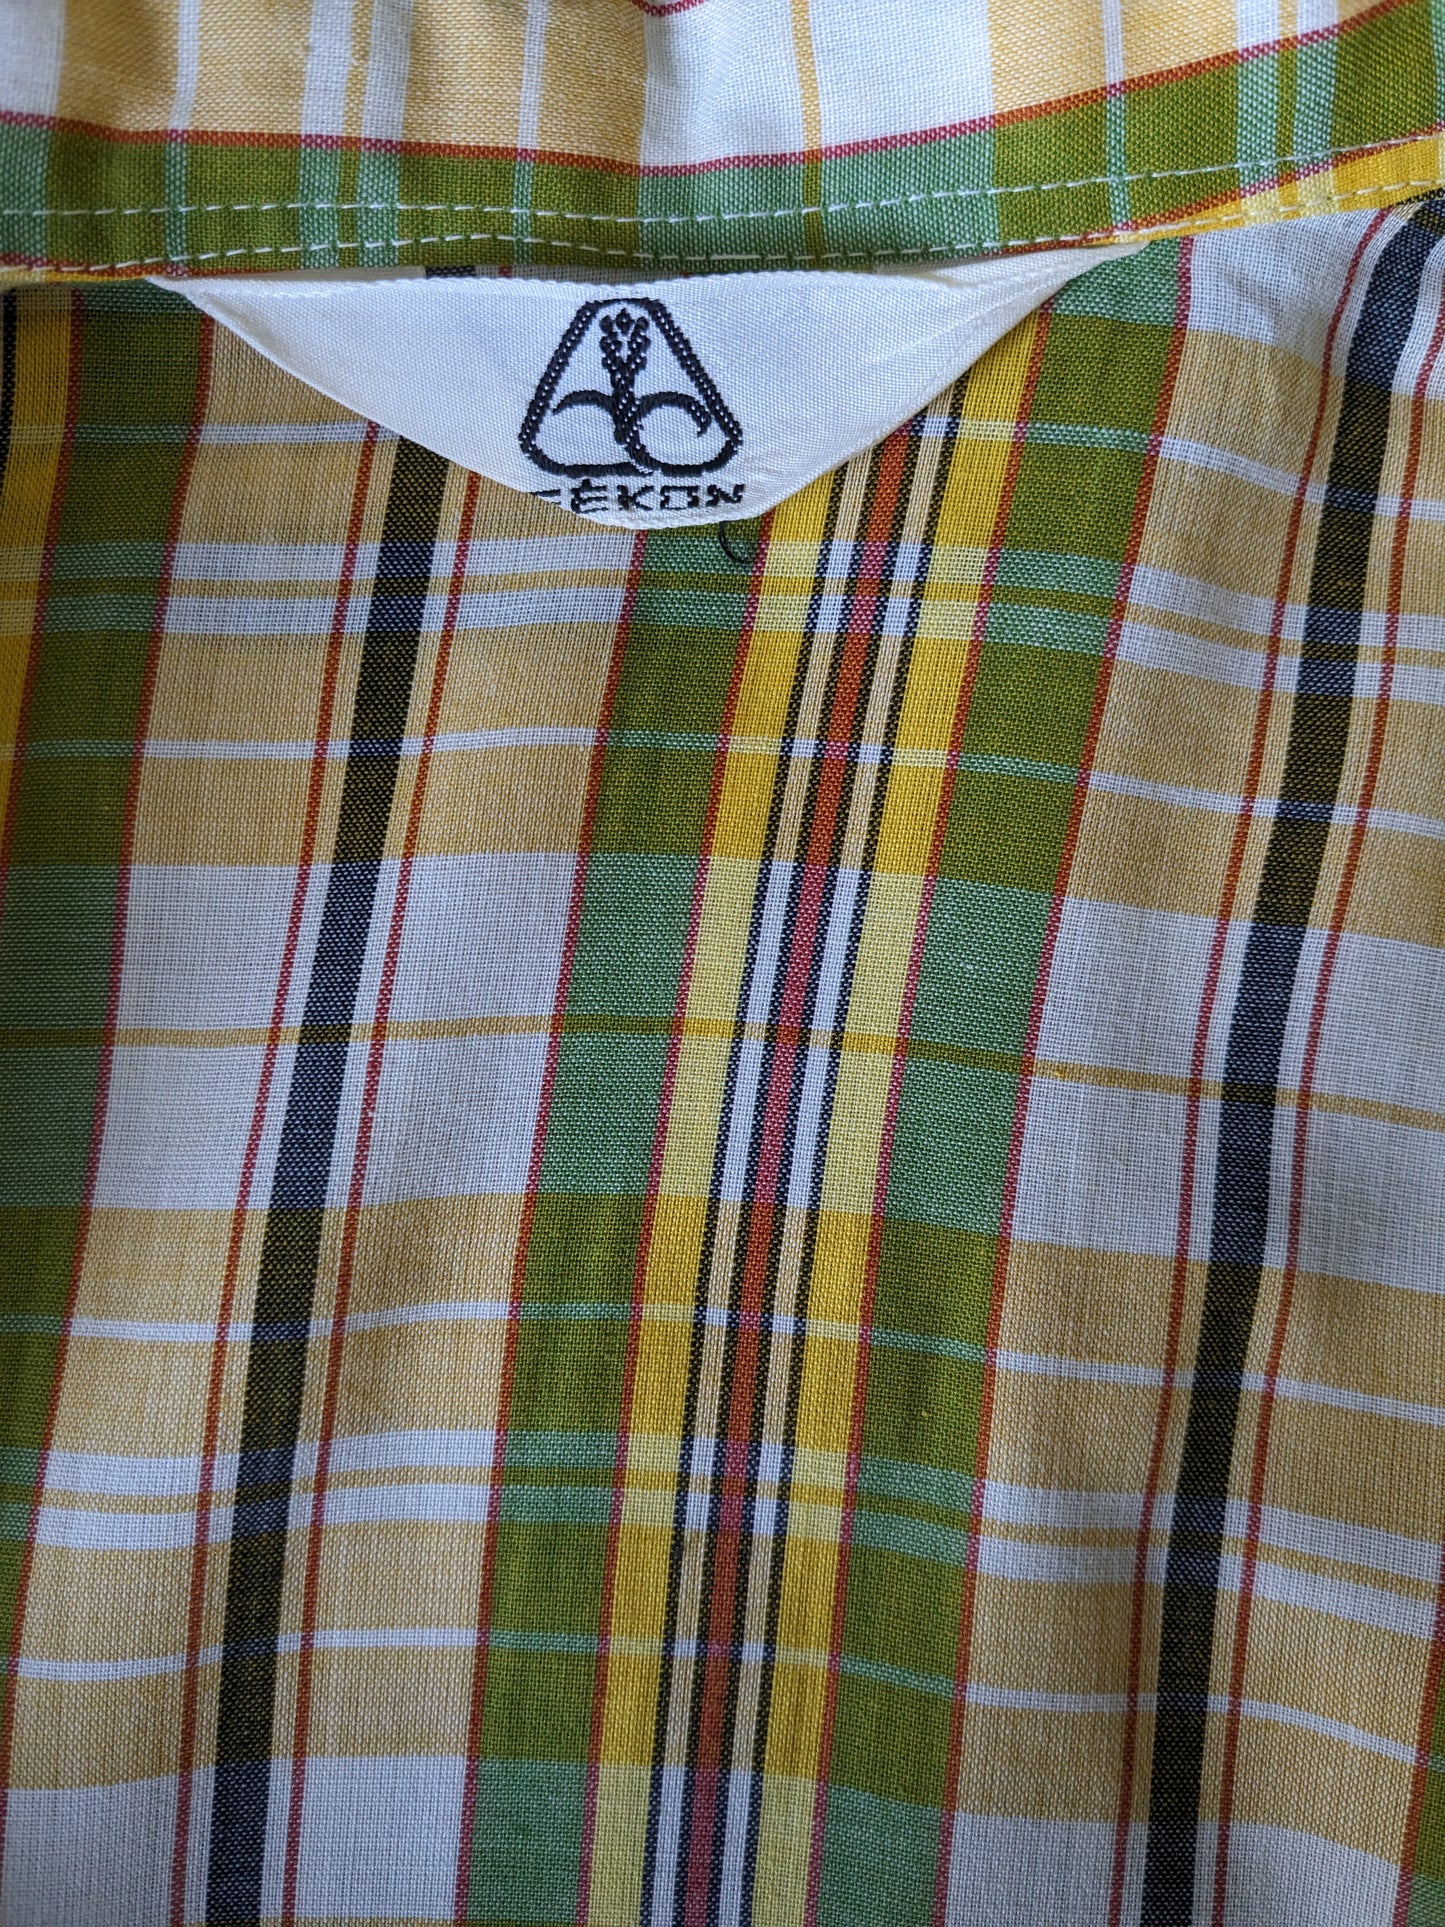 Vintage Fekon shirt with point collar. Yellow green red checked. Size M.